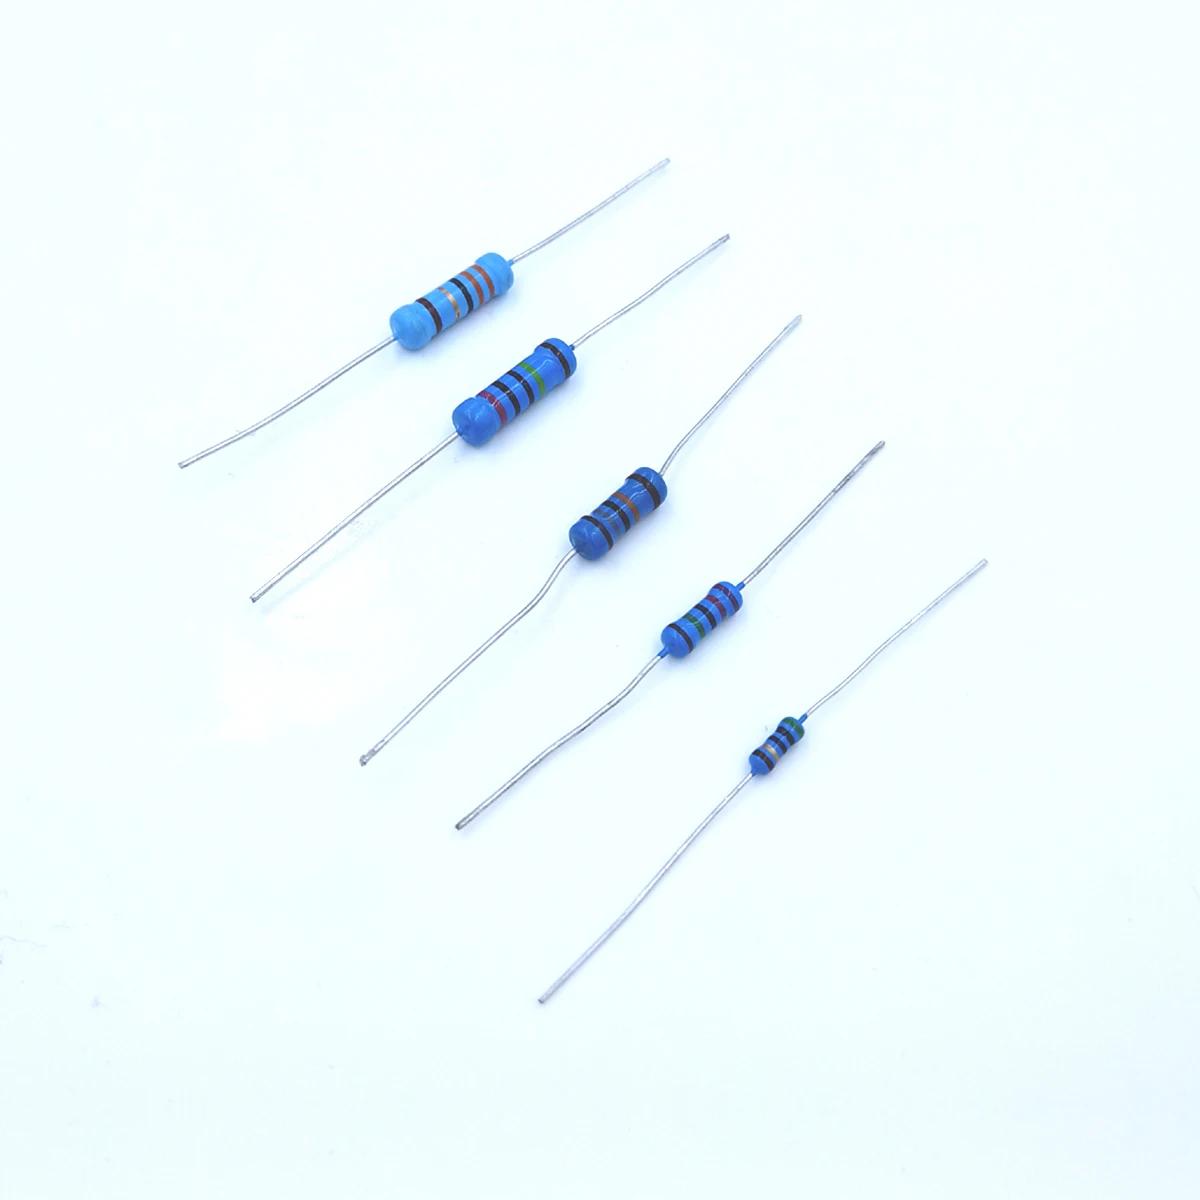 

100Pcs 3.9R 4.3R 4.7R 5.1R 3.9Ohm 4.3Ohm 4.7Ohm 3.9 4.3 4.7 5.1 R Ohm 1/2W 0.5W 1% Metal Film Resistor Colored ring Resistance